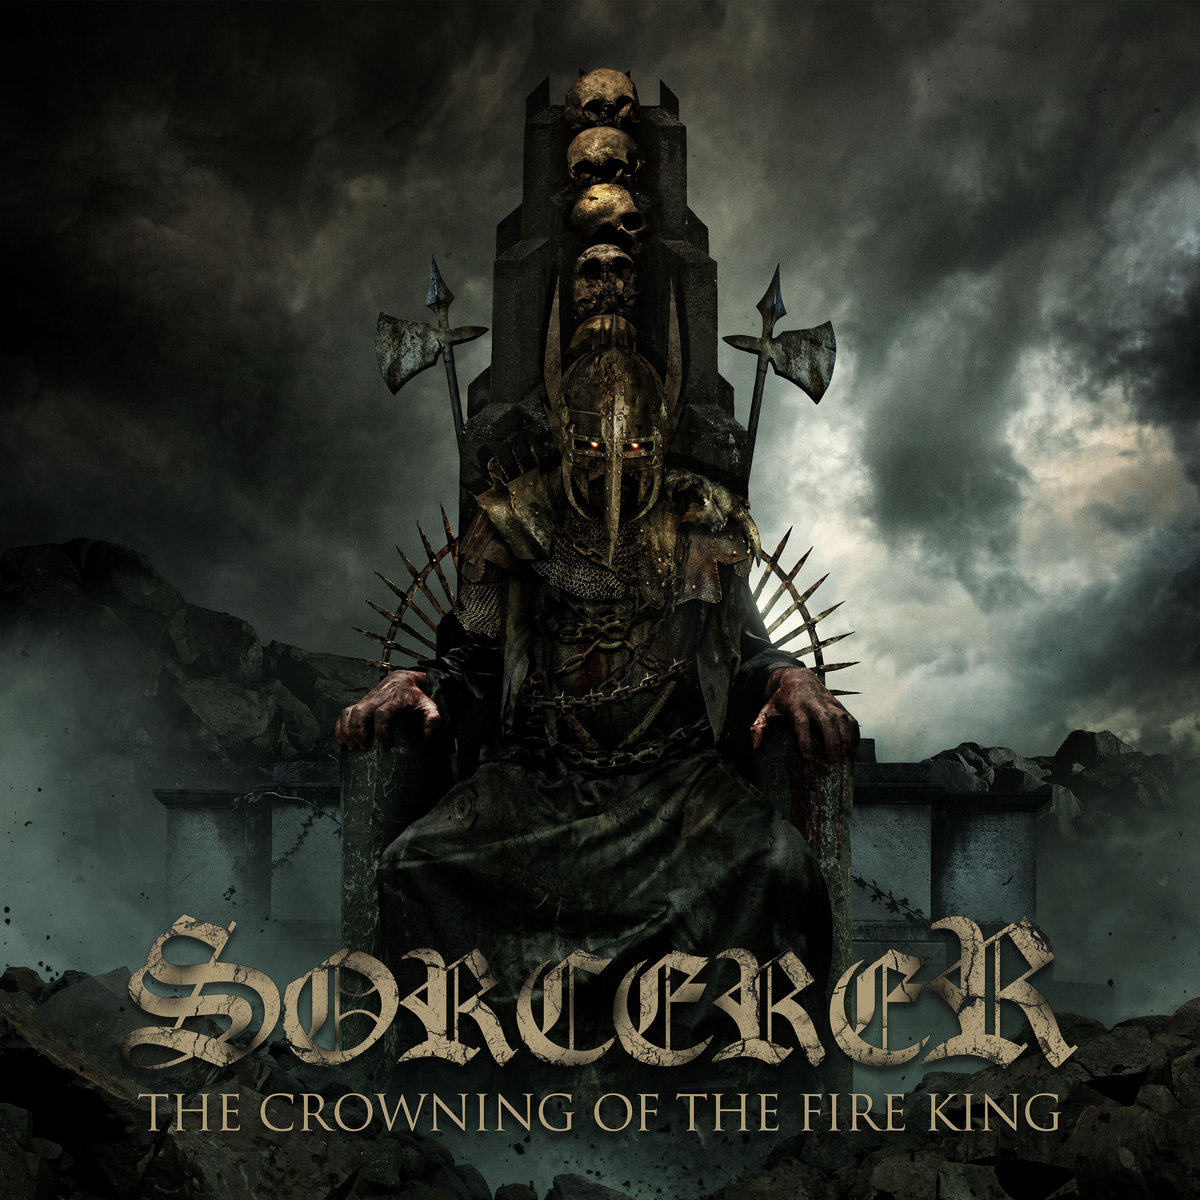 Sorcerer-The-Crowning-Of-The-Fire-King-ghostcultmag.jpg